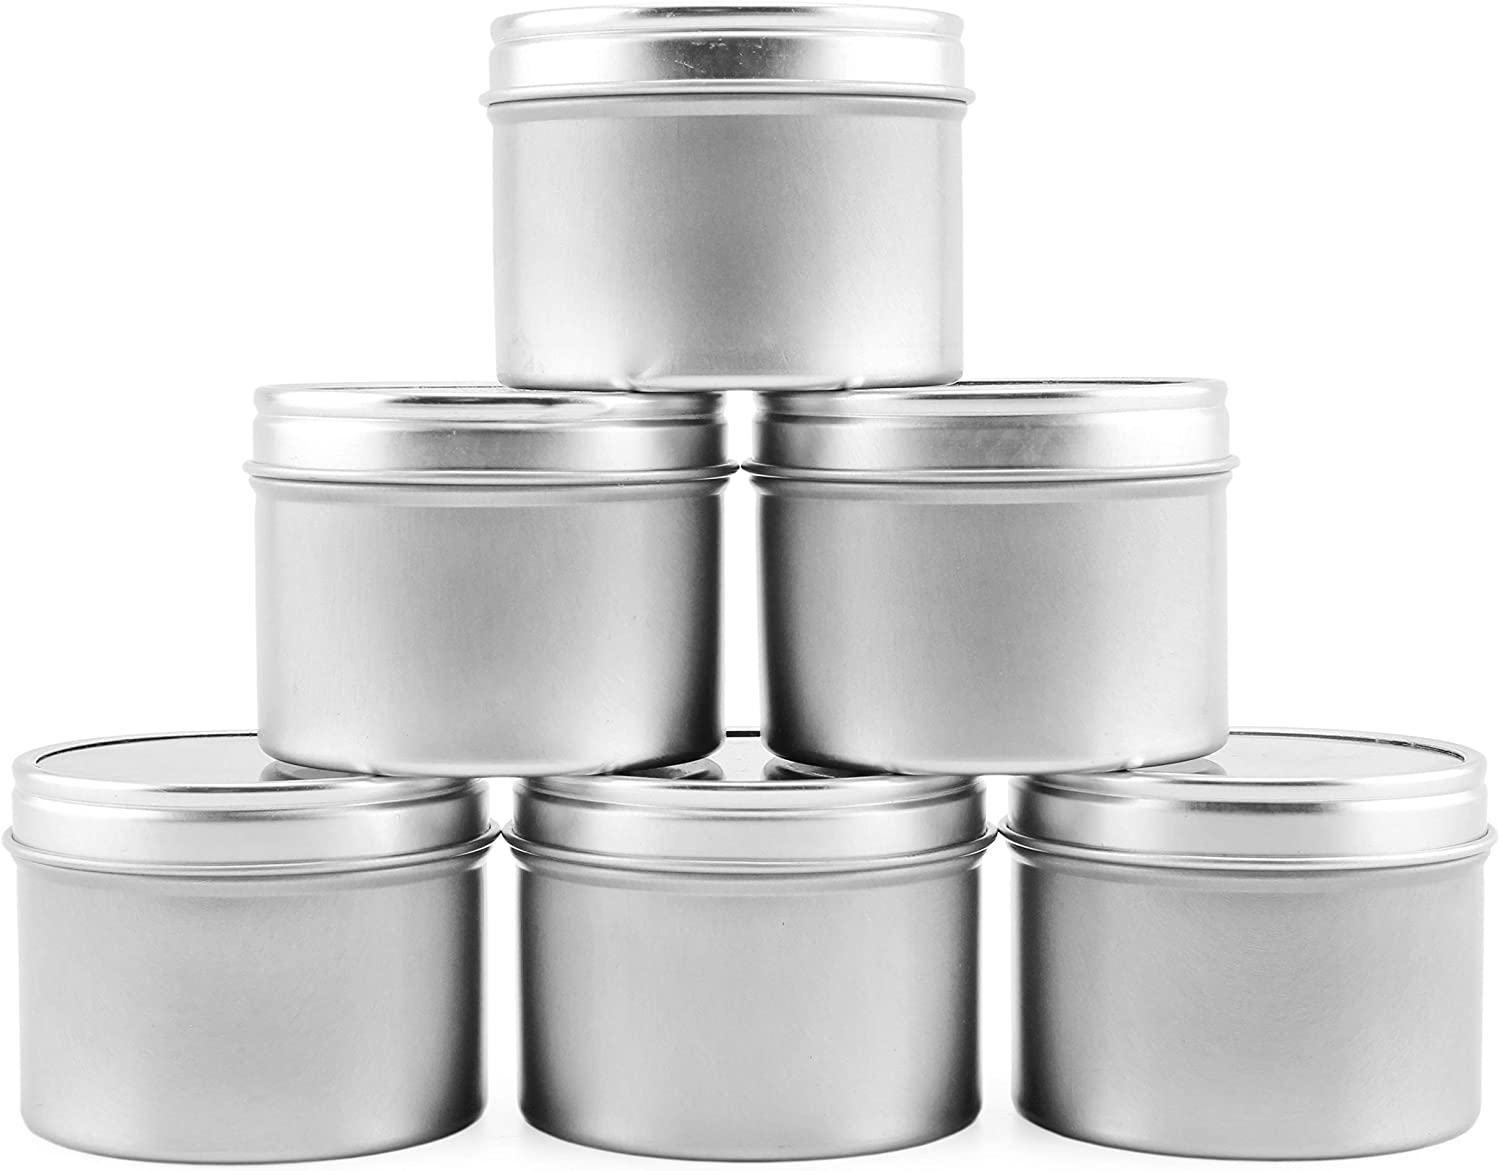 Cornucopia Brands 4-Ounce Metal Tins/Candle Tins (24-Pack); Round Containers with Slip-On Lids for